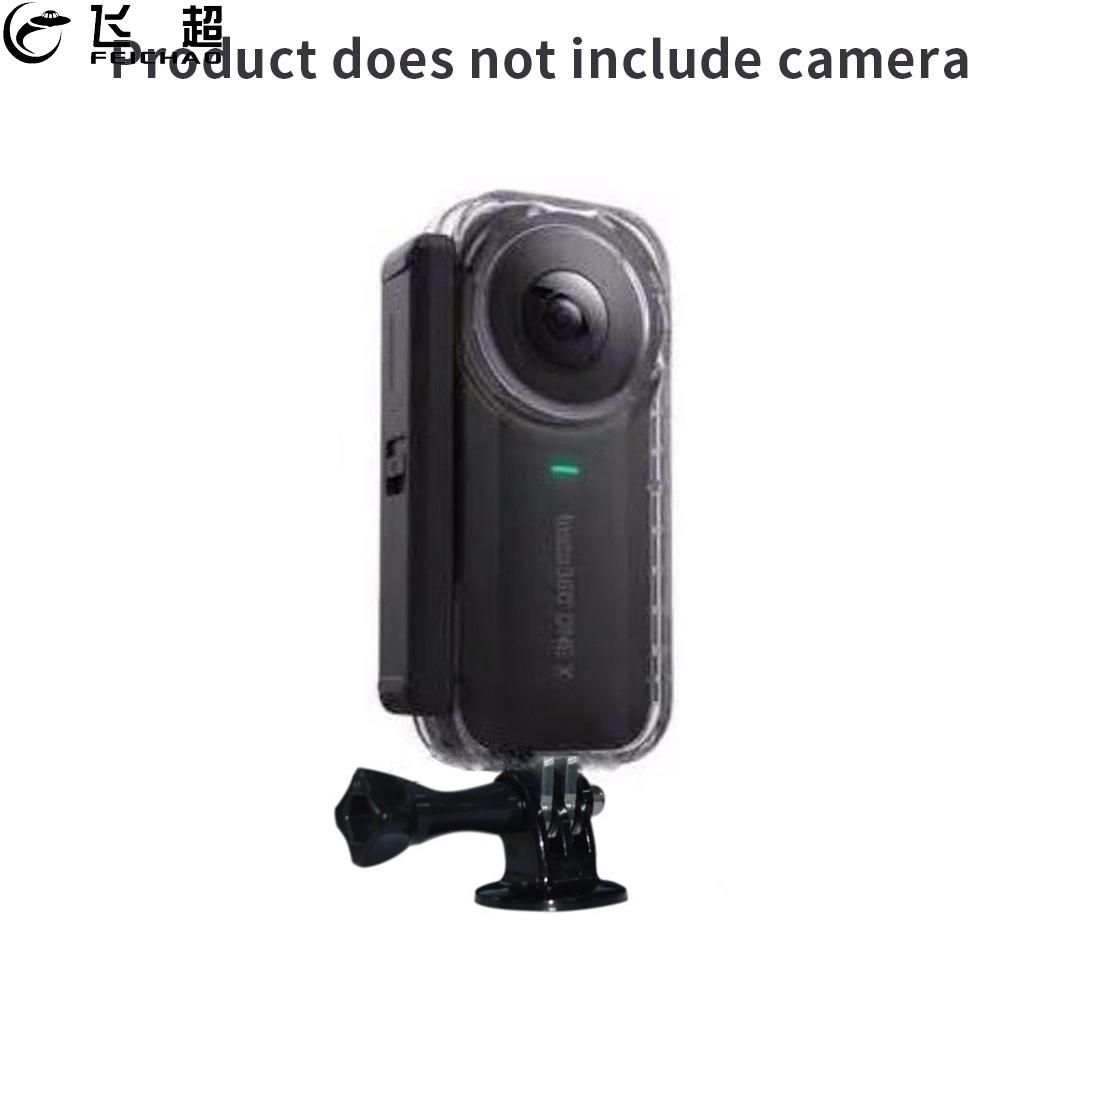 1x Underwater 5M 30M Waterproof Housing Shell Diving Case Box for Insta360 One X Insta 360 VR 360 Panoramic Camera Accessories